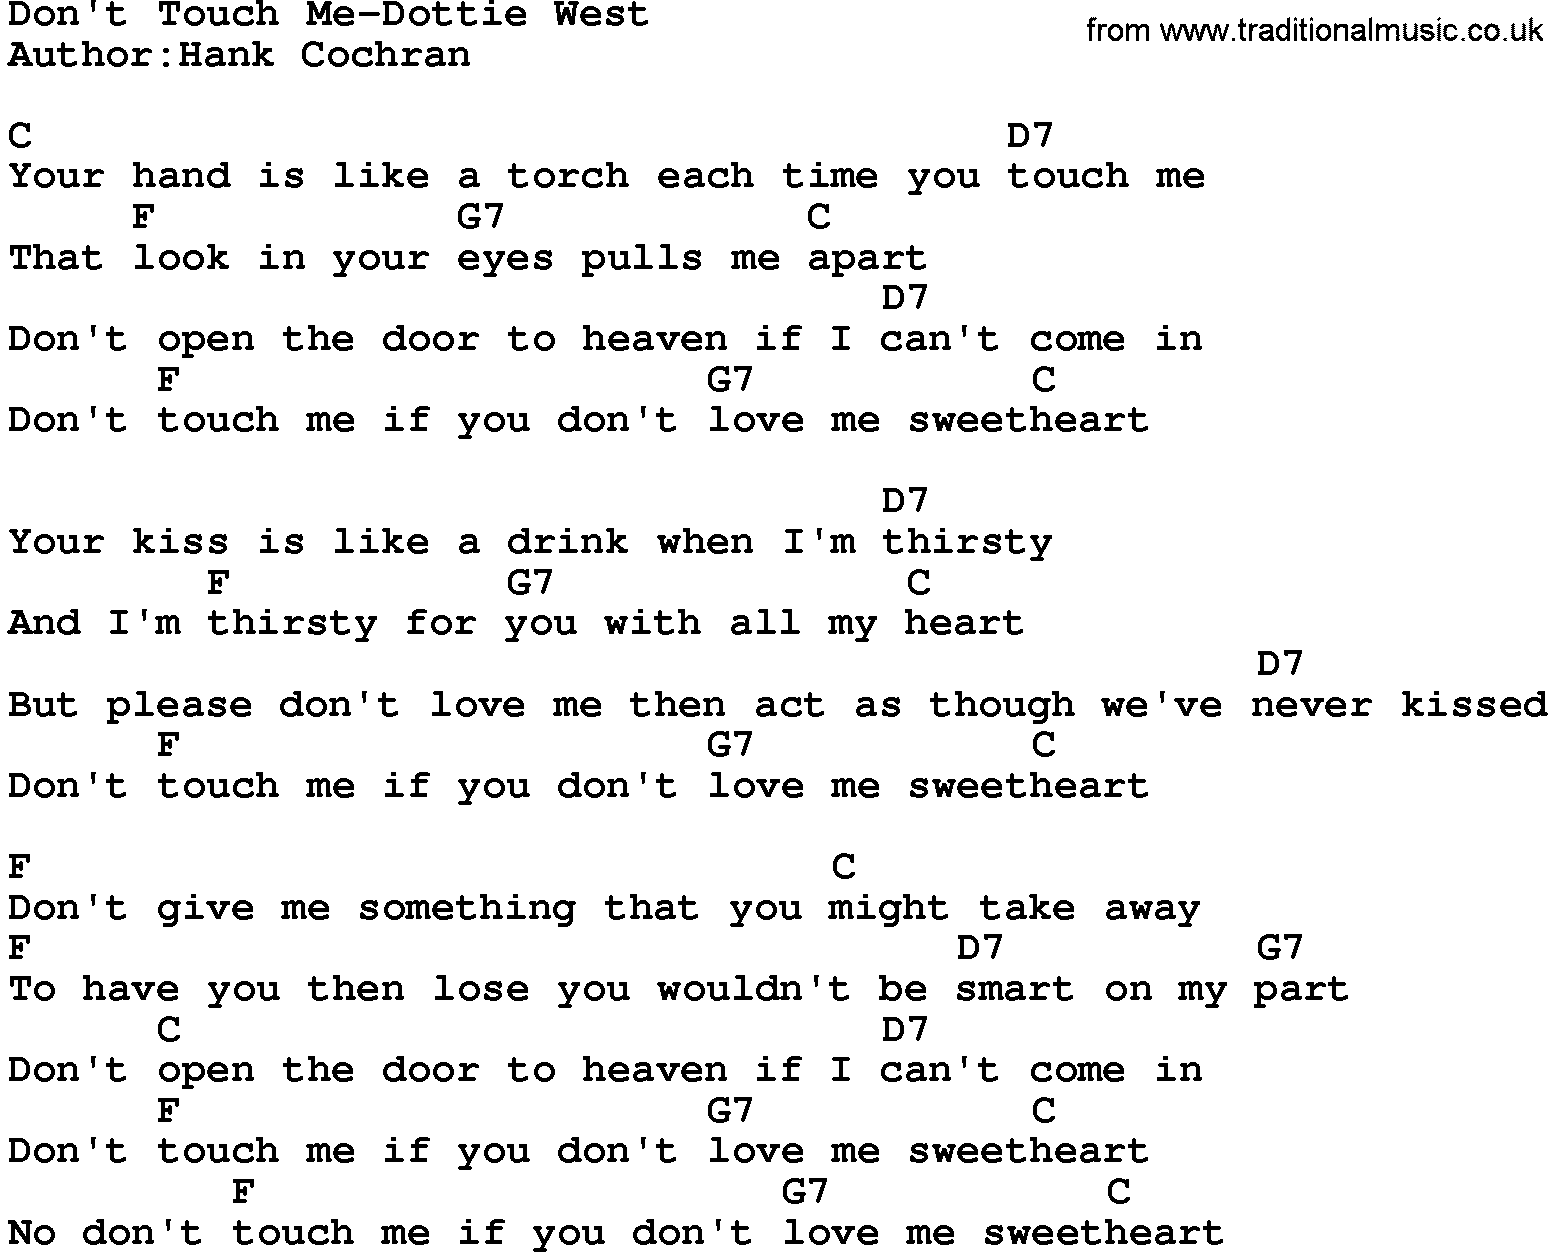 Country music song: Don't Touch Me-Dottie West lyrics and chords